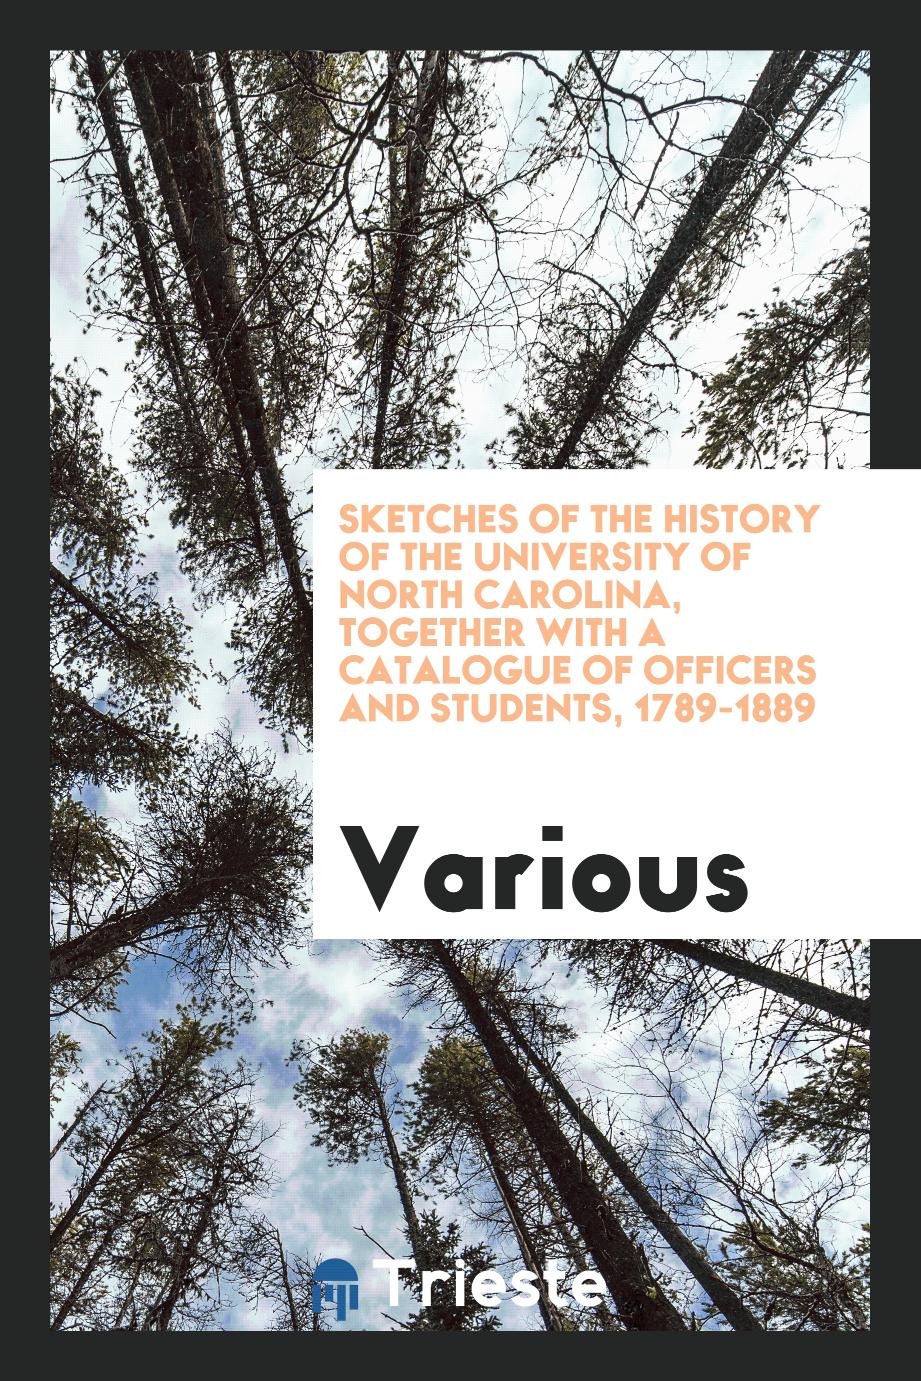 Sketches of the history of the University of North Carolina, together with a catalogue of officers and students, 1789-1889